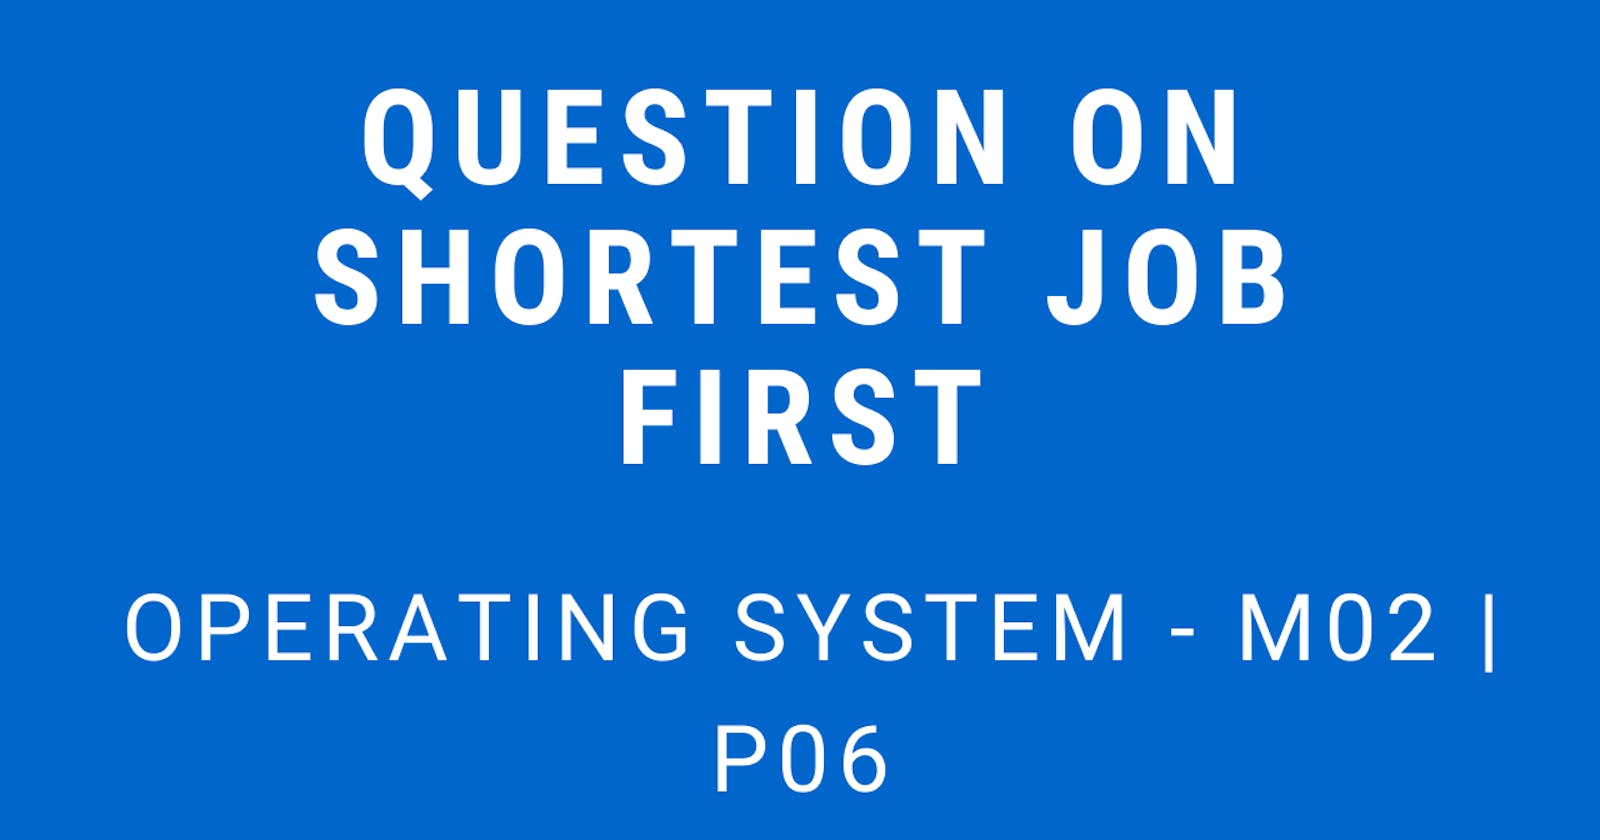 Question on Shortest Job First | Operating System - M02 P06